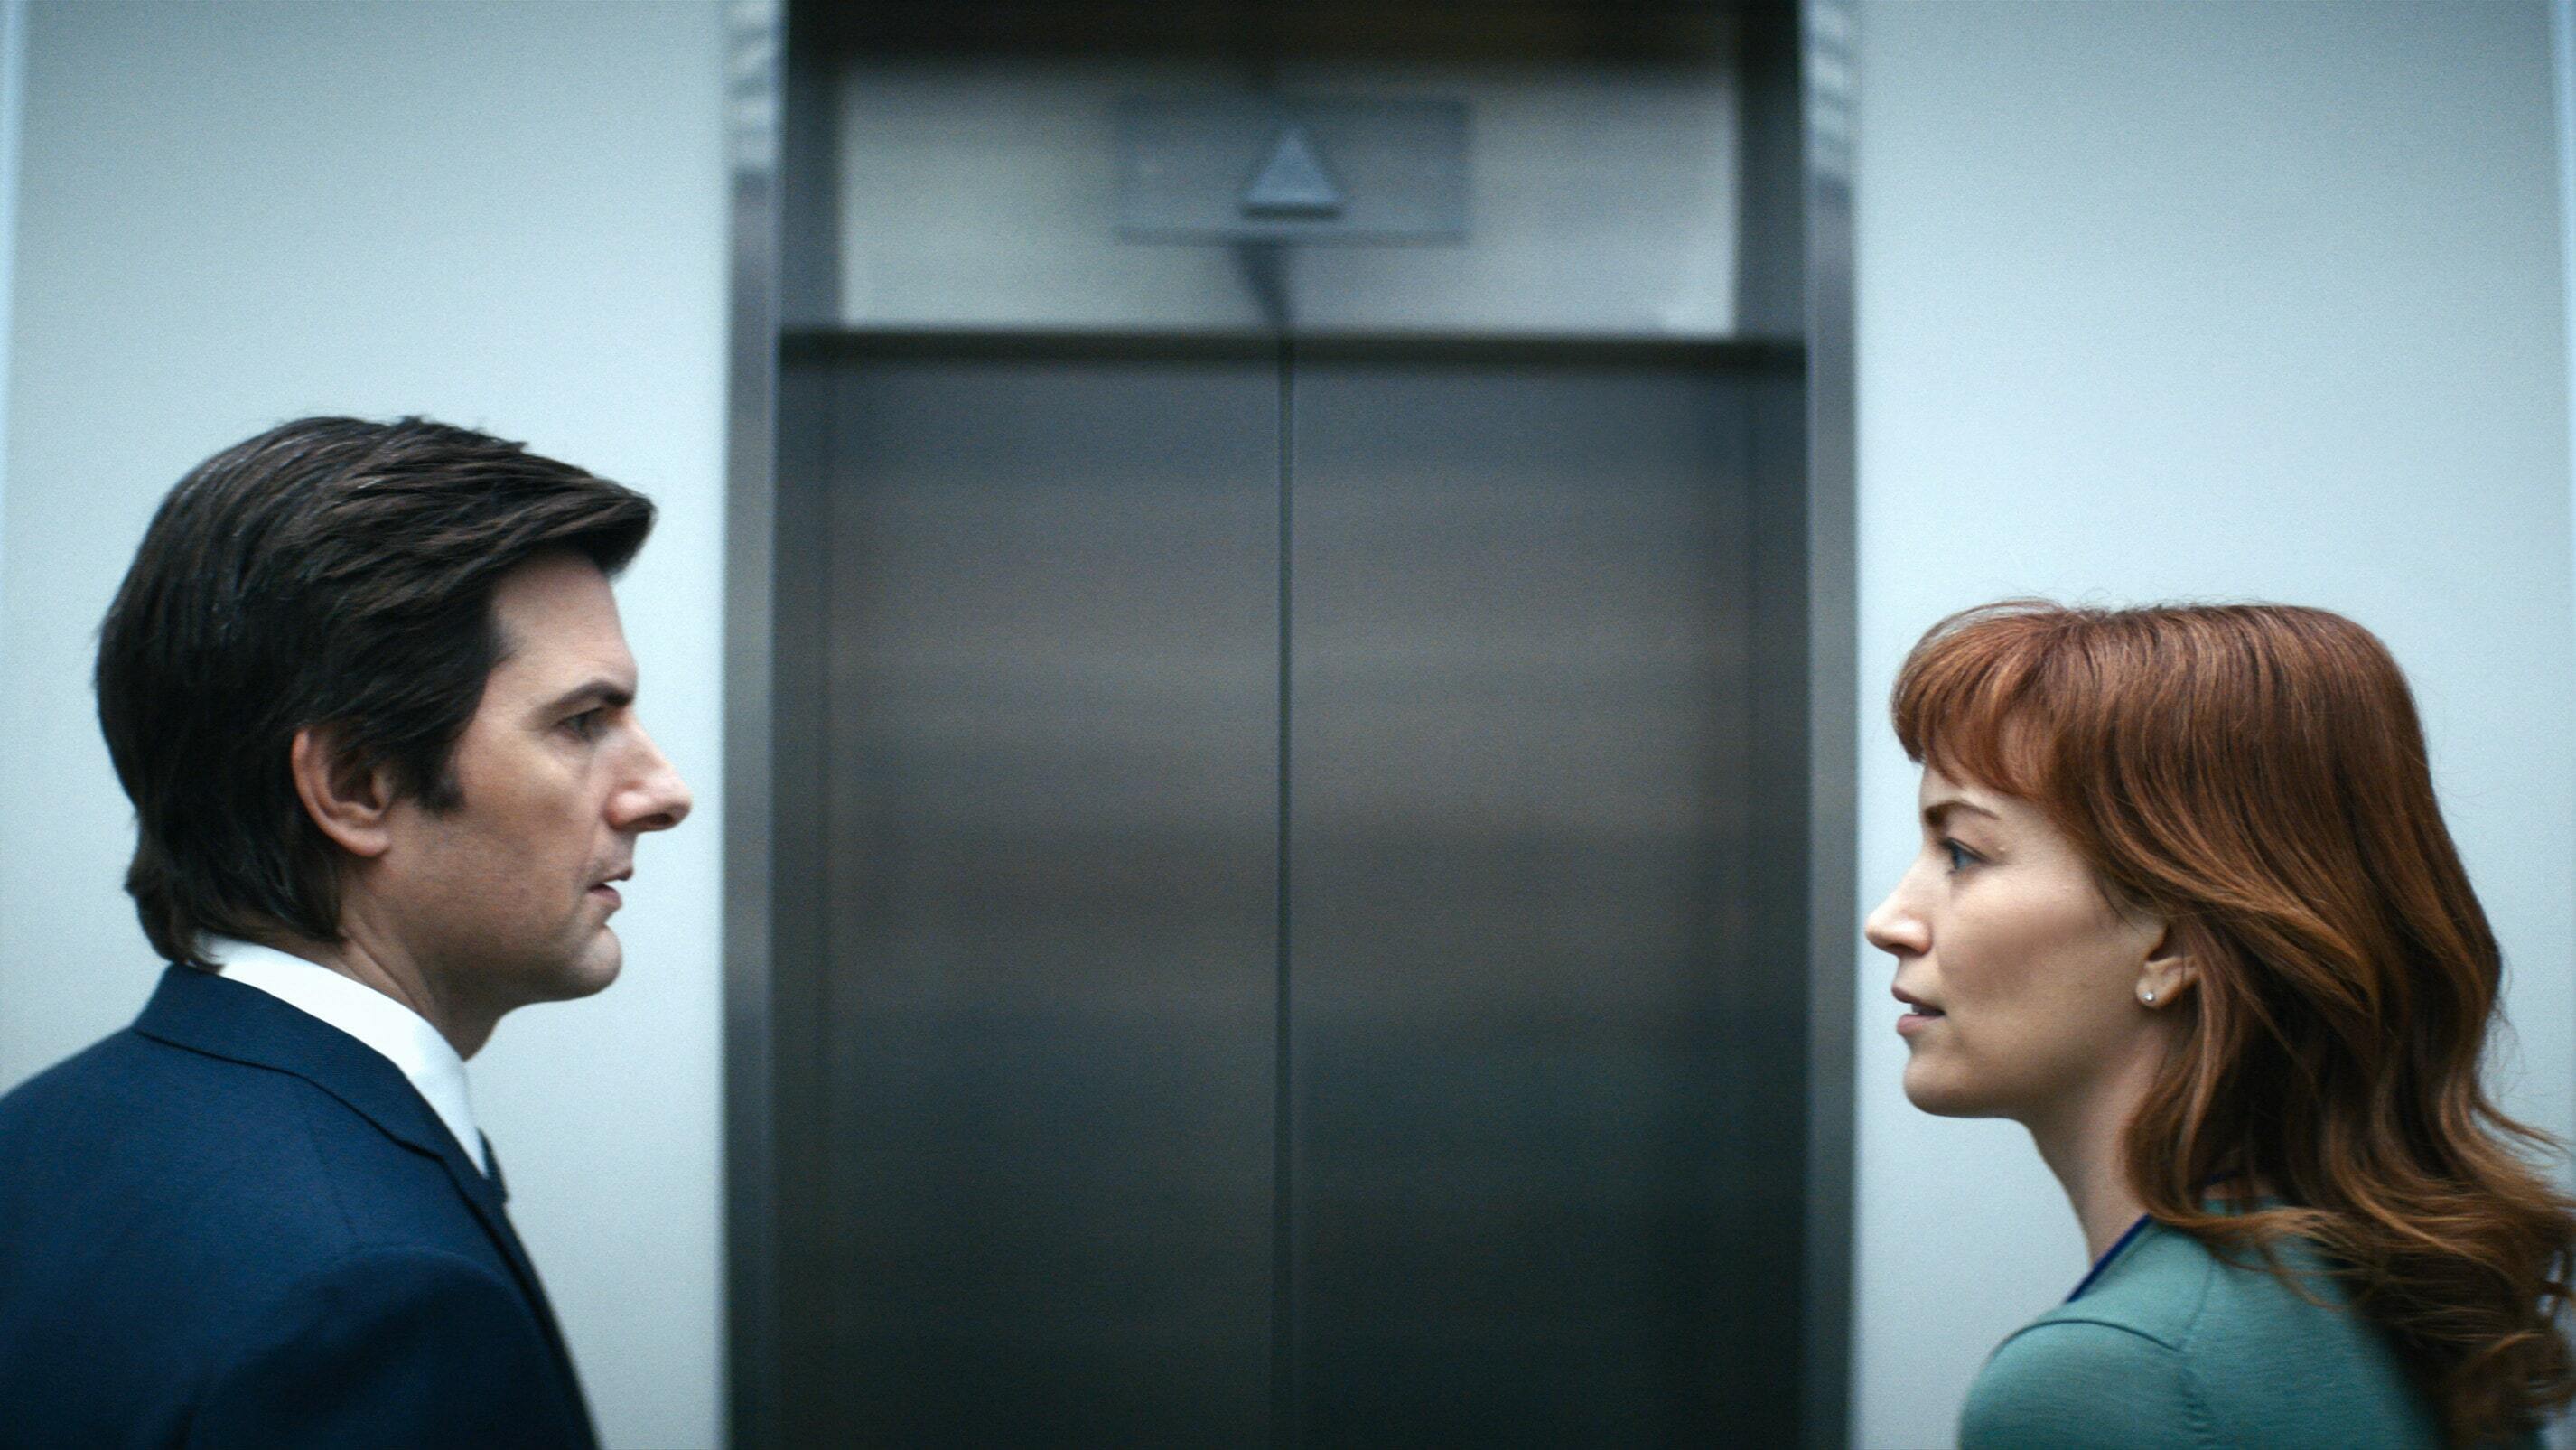 A man and a woman facing each other in front of an elevator.